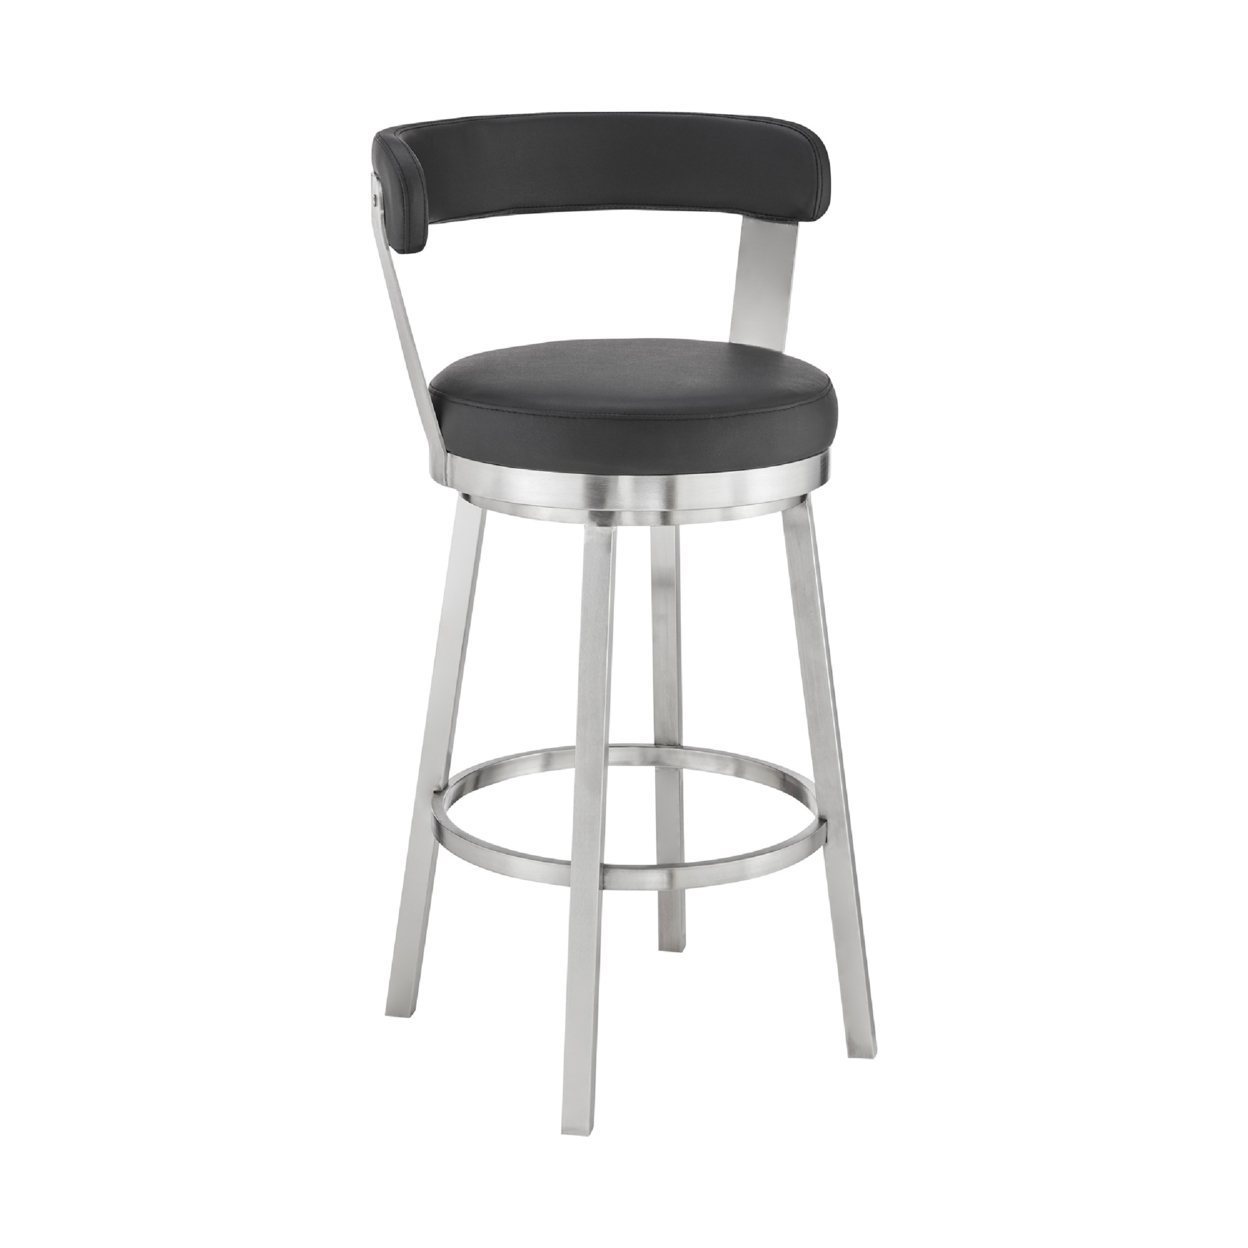 Swivel Barstool With Open Back And Metal Legs, Black And Silver- Saltoro Sherpi